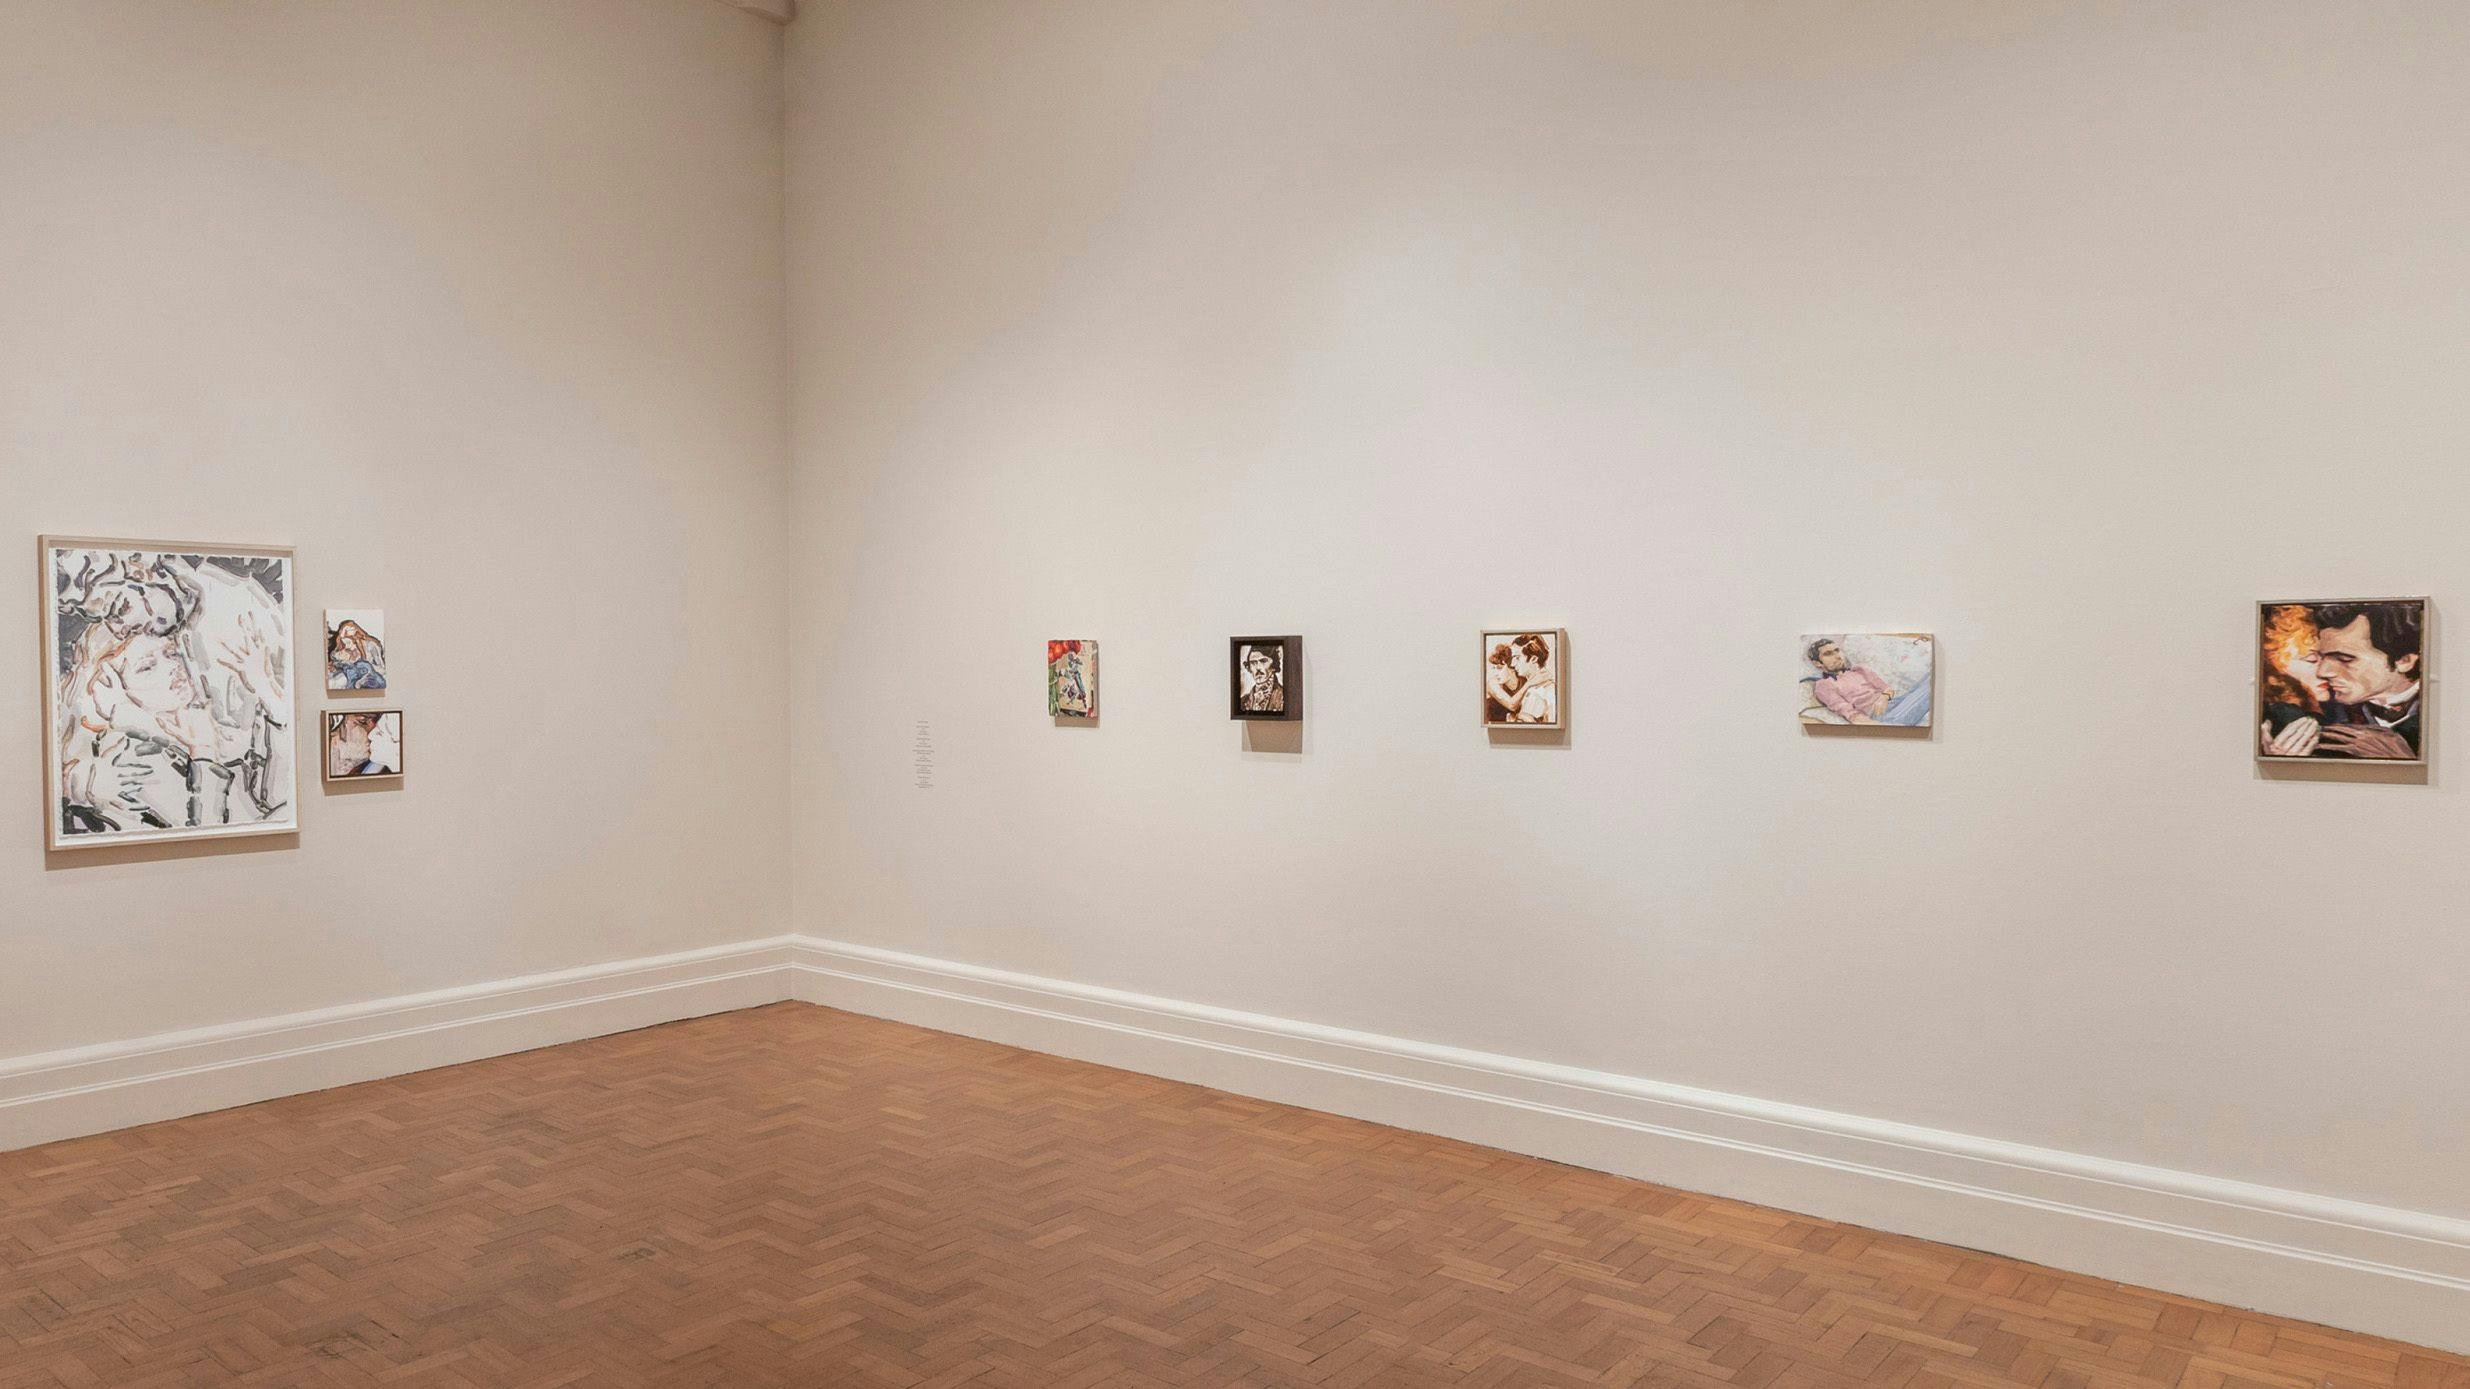 Installation view, Elizabeth Peyton: Aire and Angels, National Portrait Gallery, London, October 3, 2019–January 5, 2020. Photo © National Portrait Gallery, London